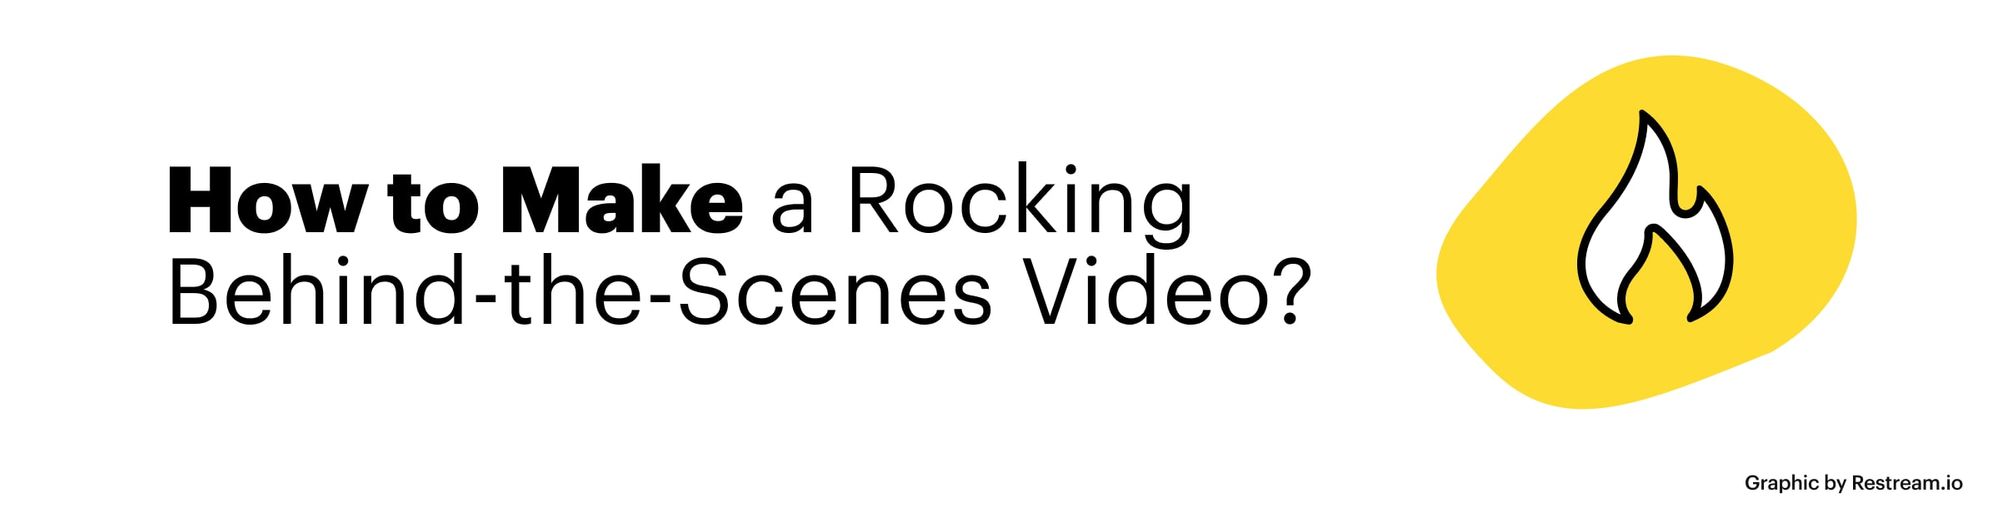 How to Make a Rocking Behind-the-Scenes Video?